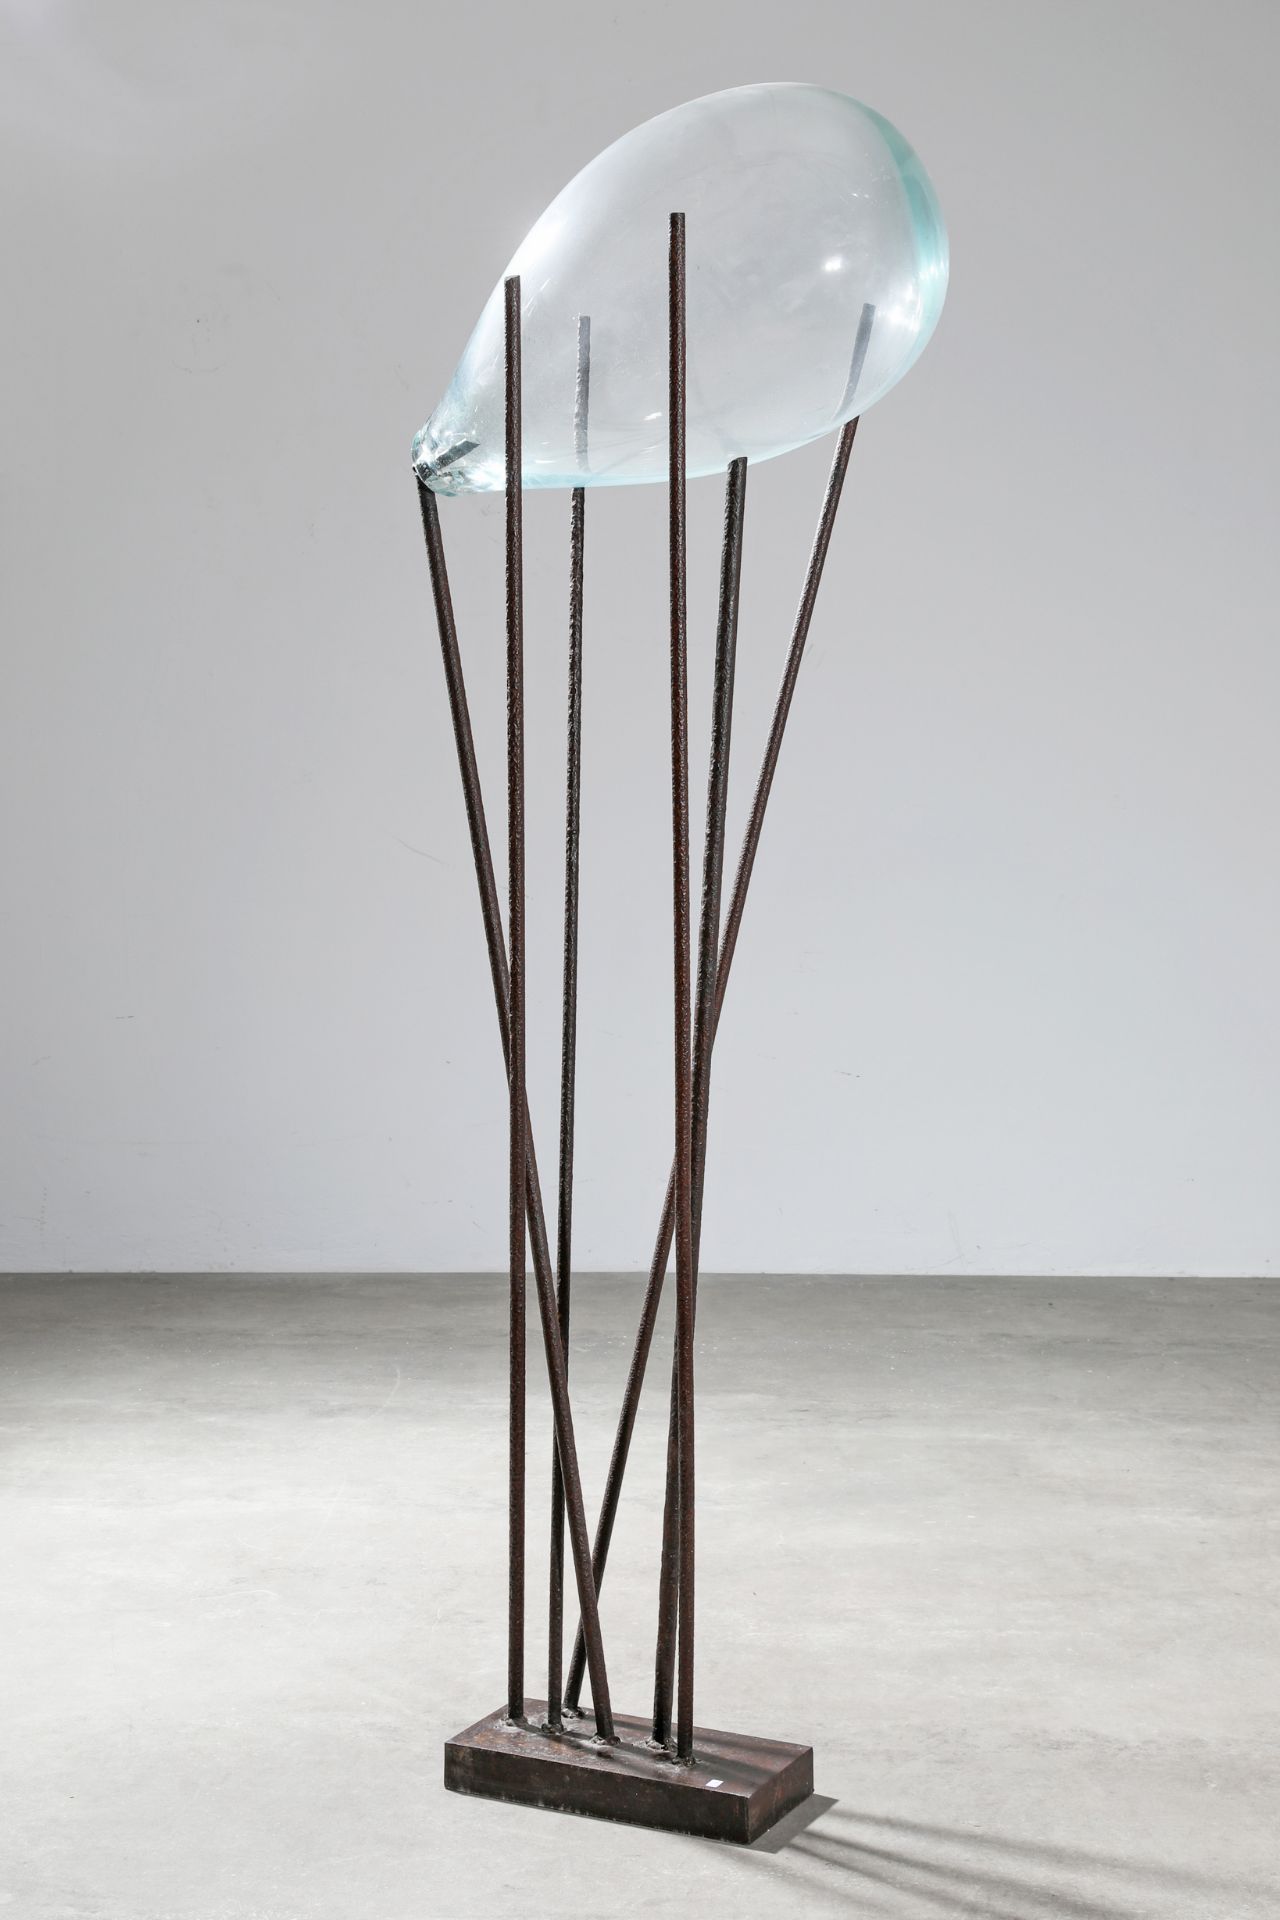 Xavier Carrere, OVITES, Glass / steel object with catalog